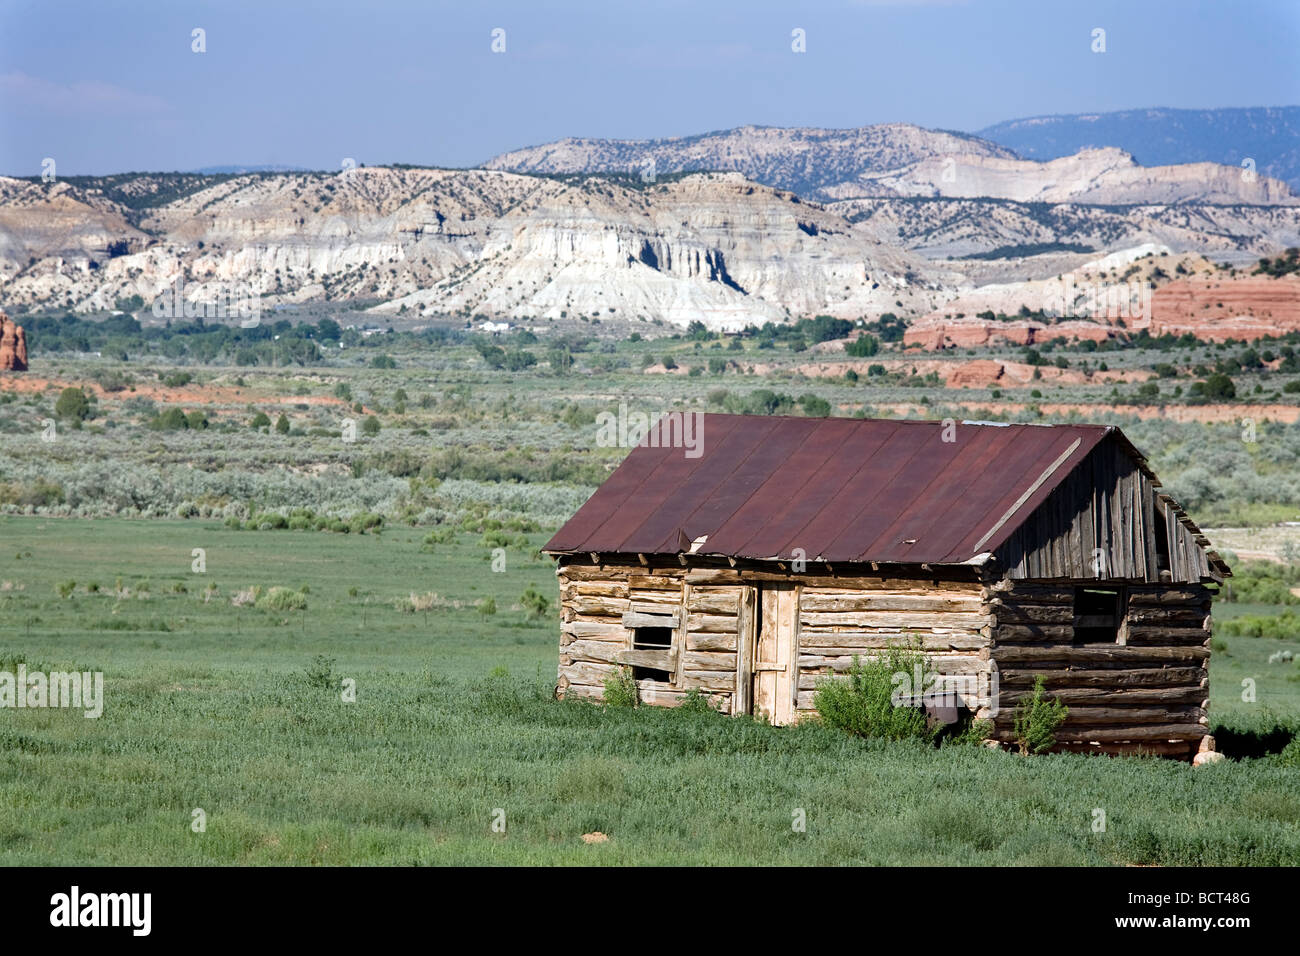 Old cabin on a ranch in the Grand Staircase Escalante National Monument area Stock Photo